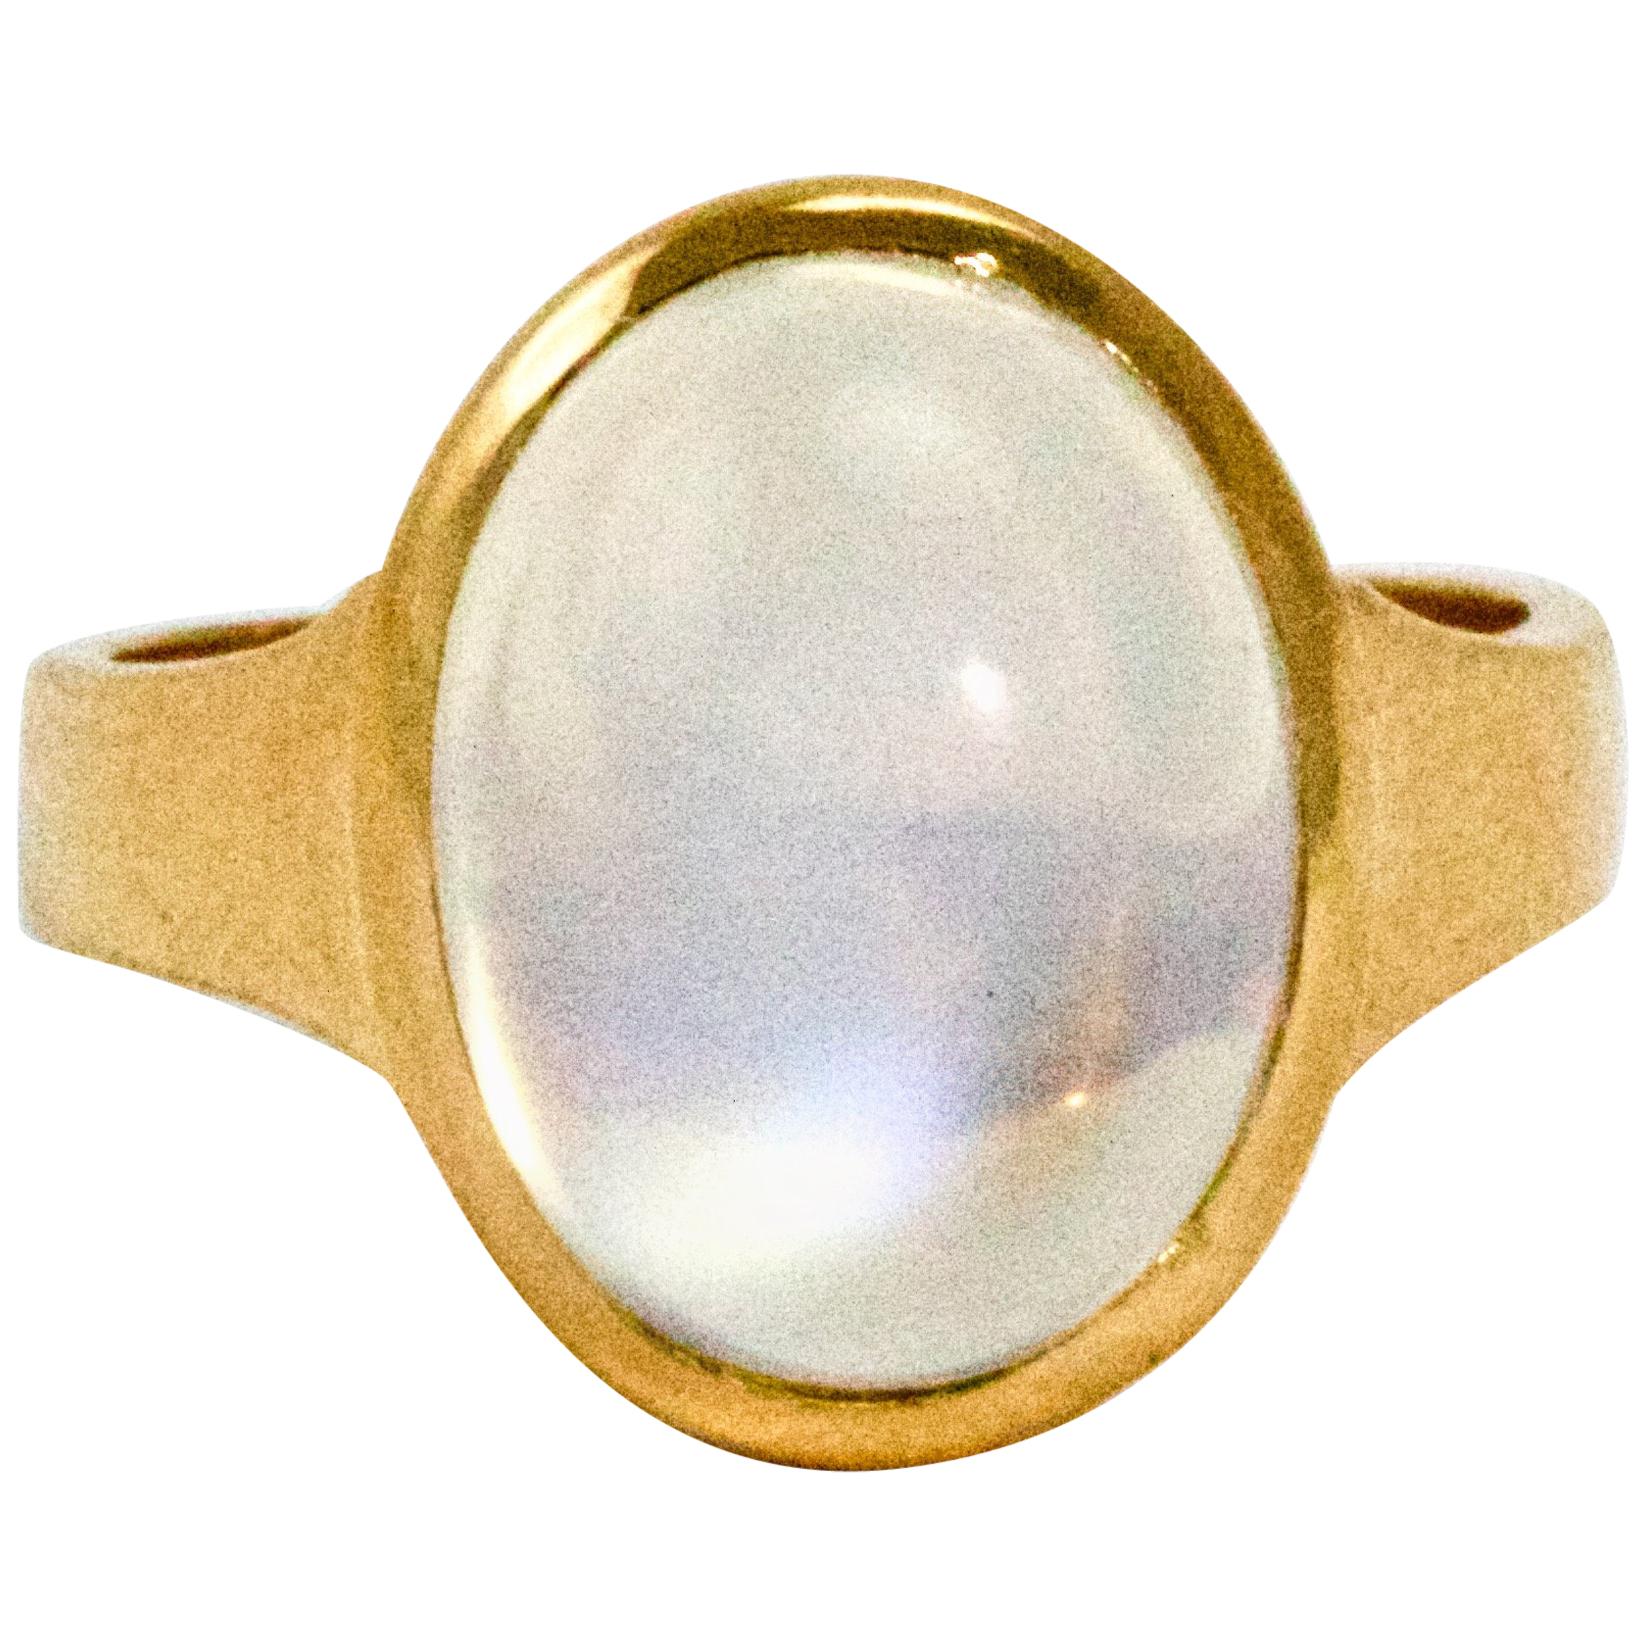 22 Carat Yellow Gold Moonstone Signet or Gypsy Pinky Ring